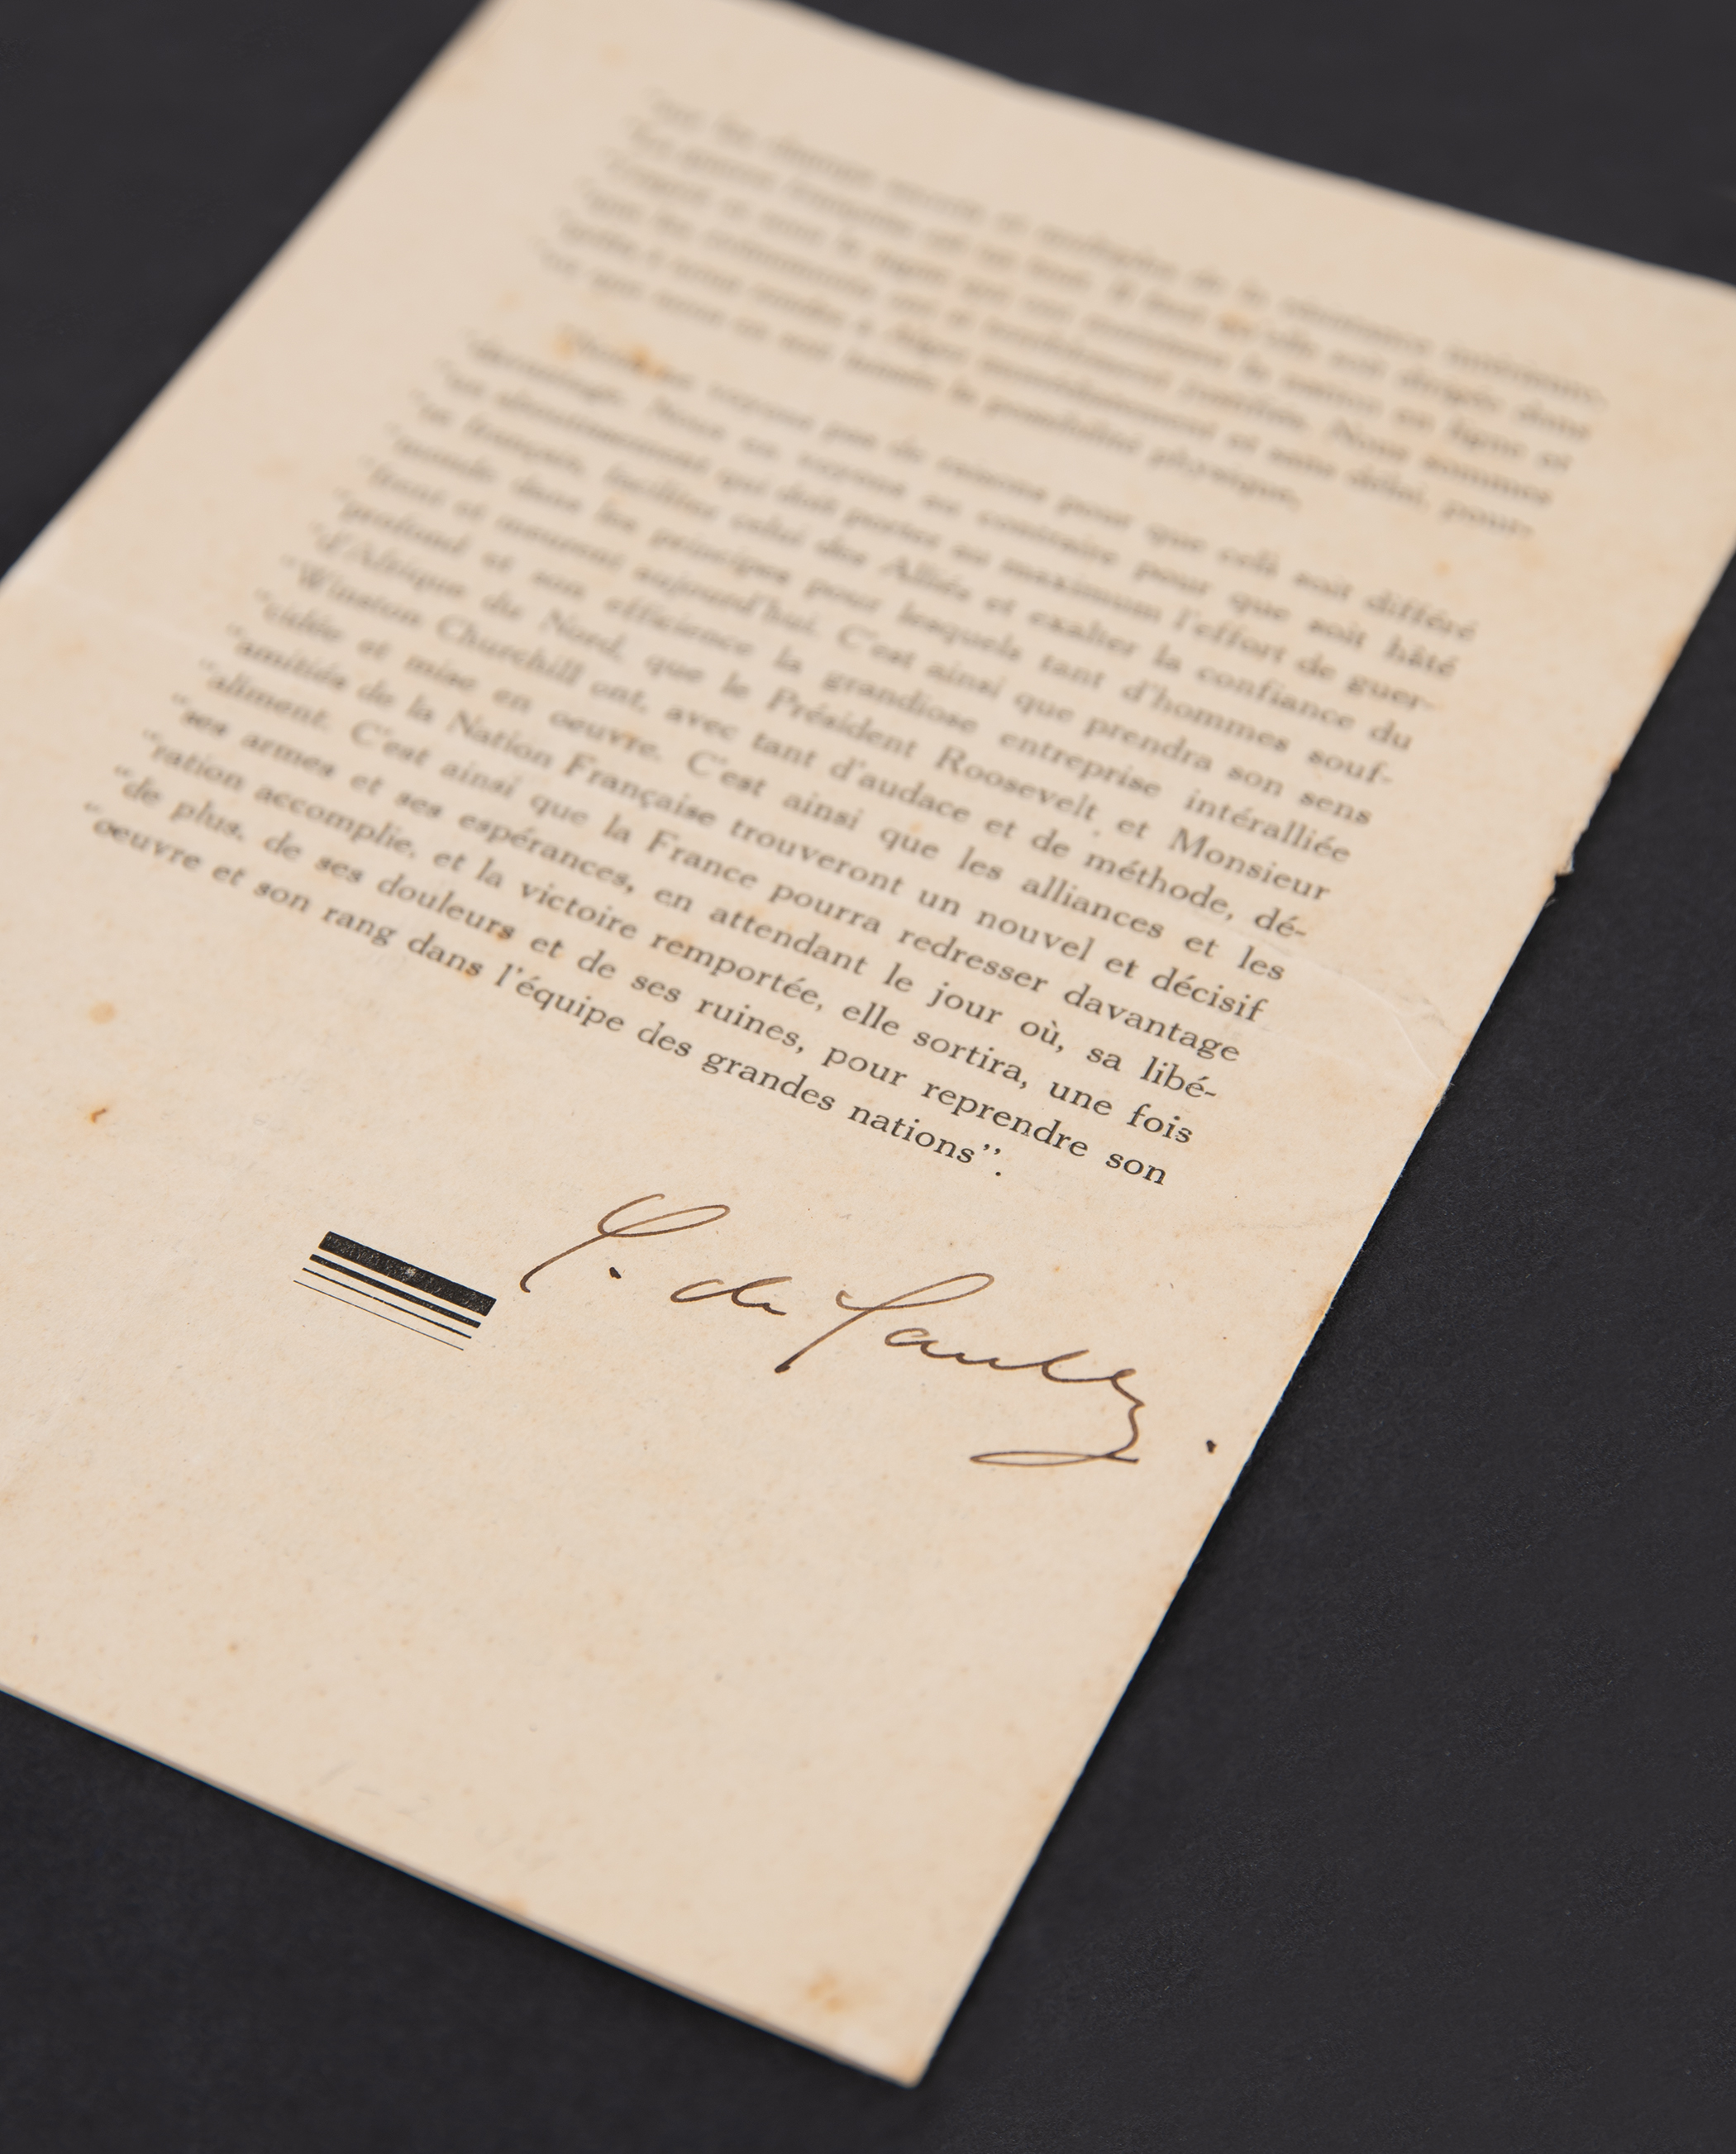 Lot #126 Charles de Gaulle Signed Printed Speech on Operation Torch and the Support of Vichy French Forces - Image 1